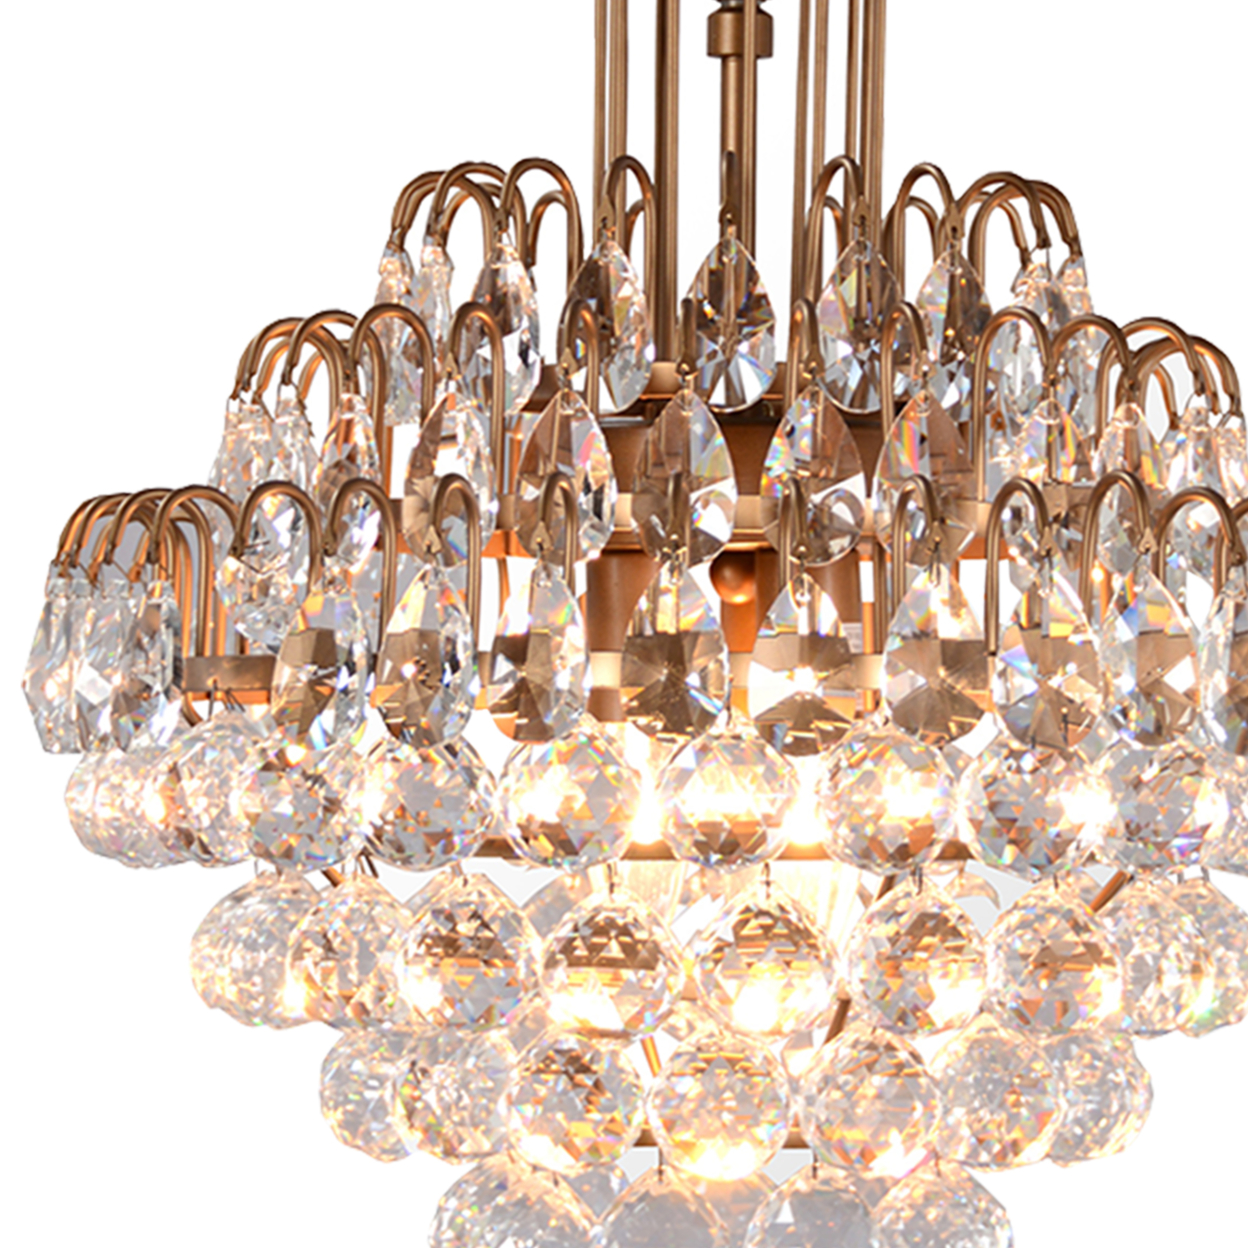 Faceted Crystal Accented 3 Light Chandelier With Metal Chain, Brass- Saltoro Sherpi